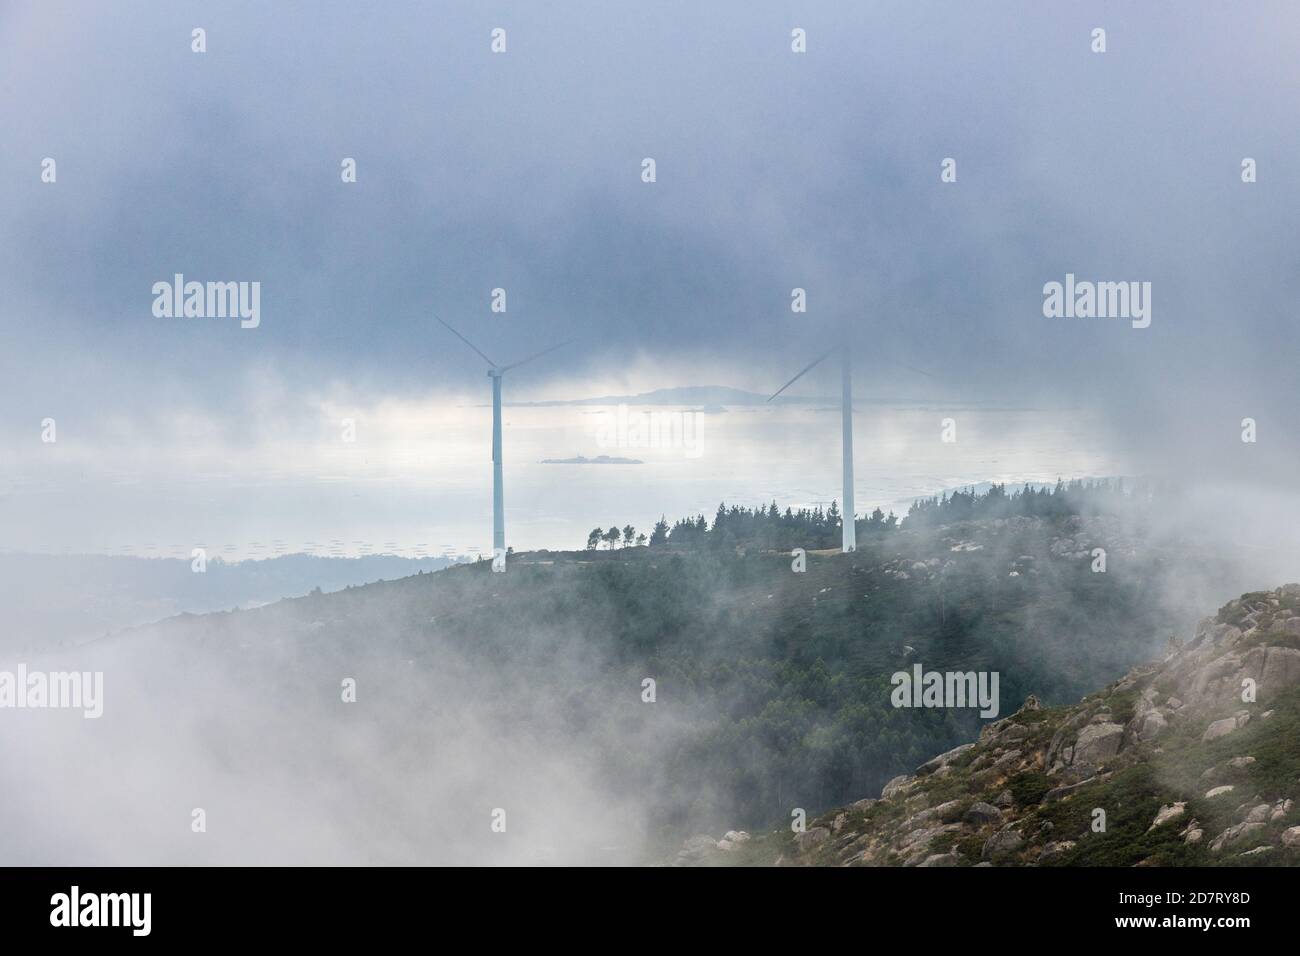 Aerial view of the Ria de Arousa estuary from the Muralla mountain on a foggy Summer afternoon, with some wind turbines among the clouds. Stock Photo